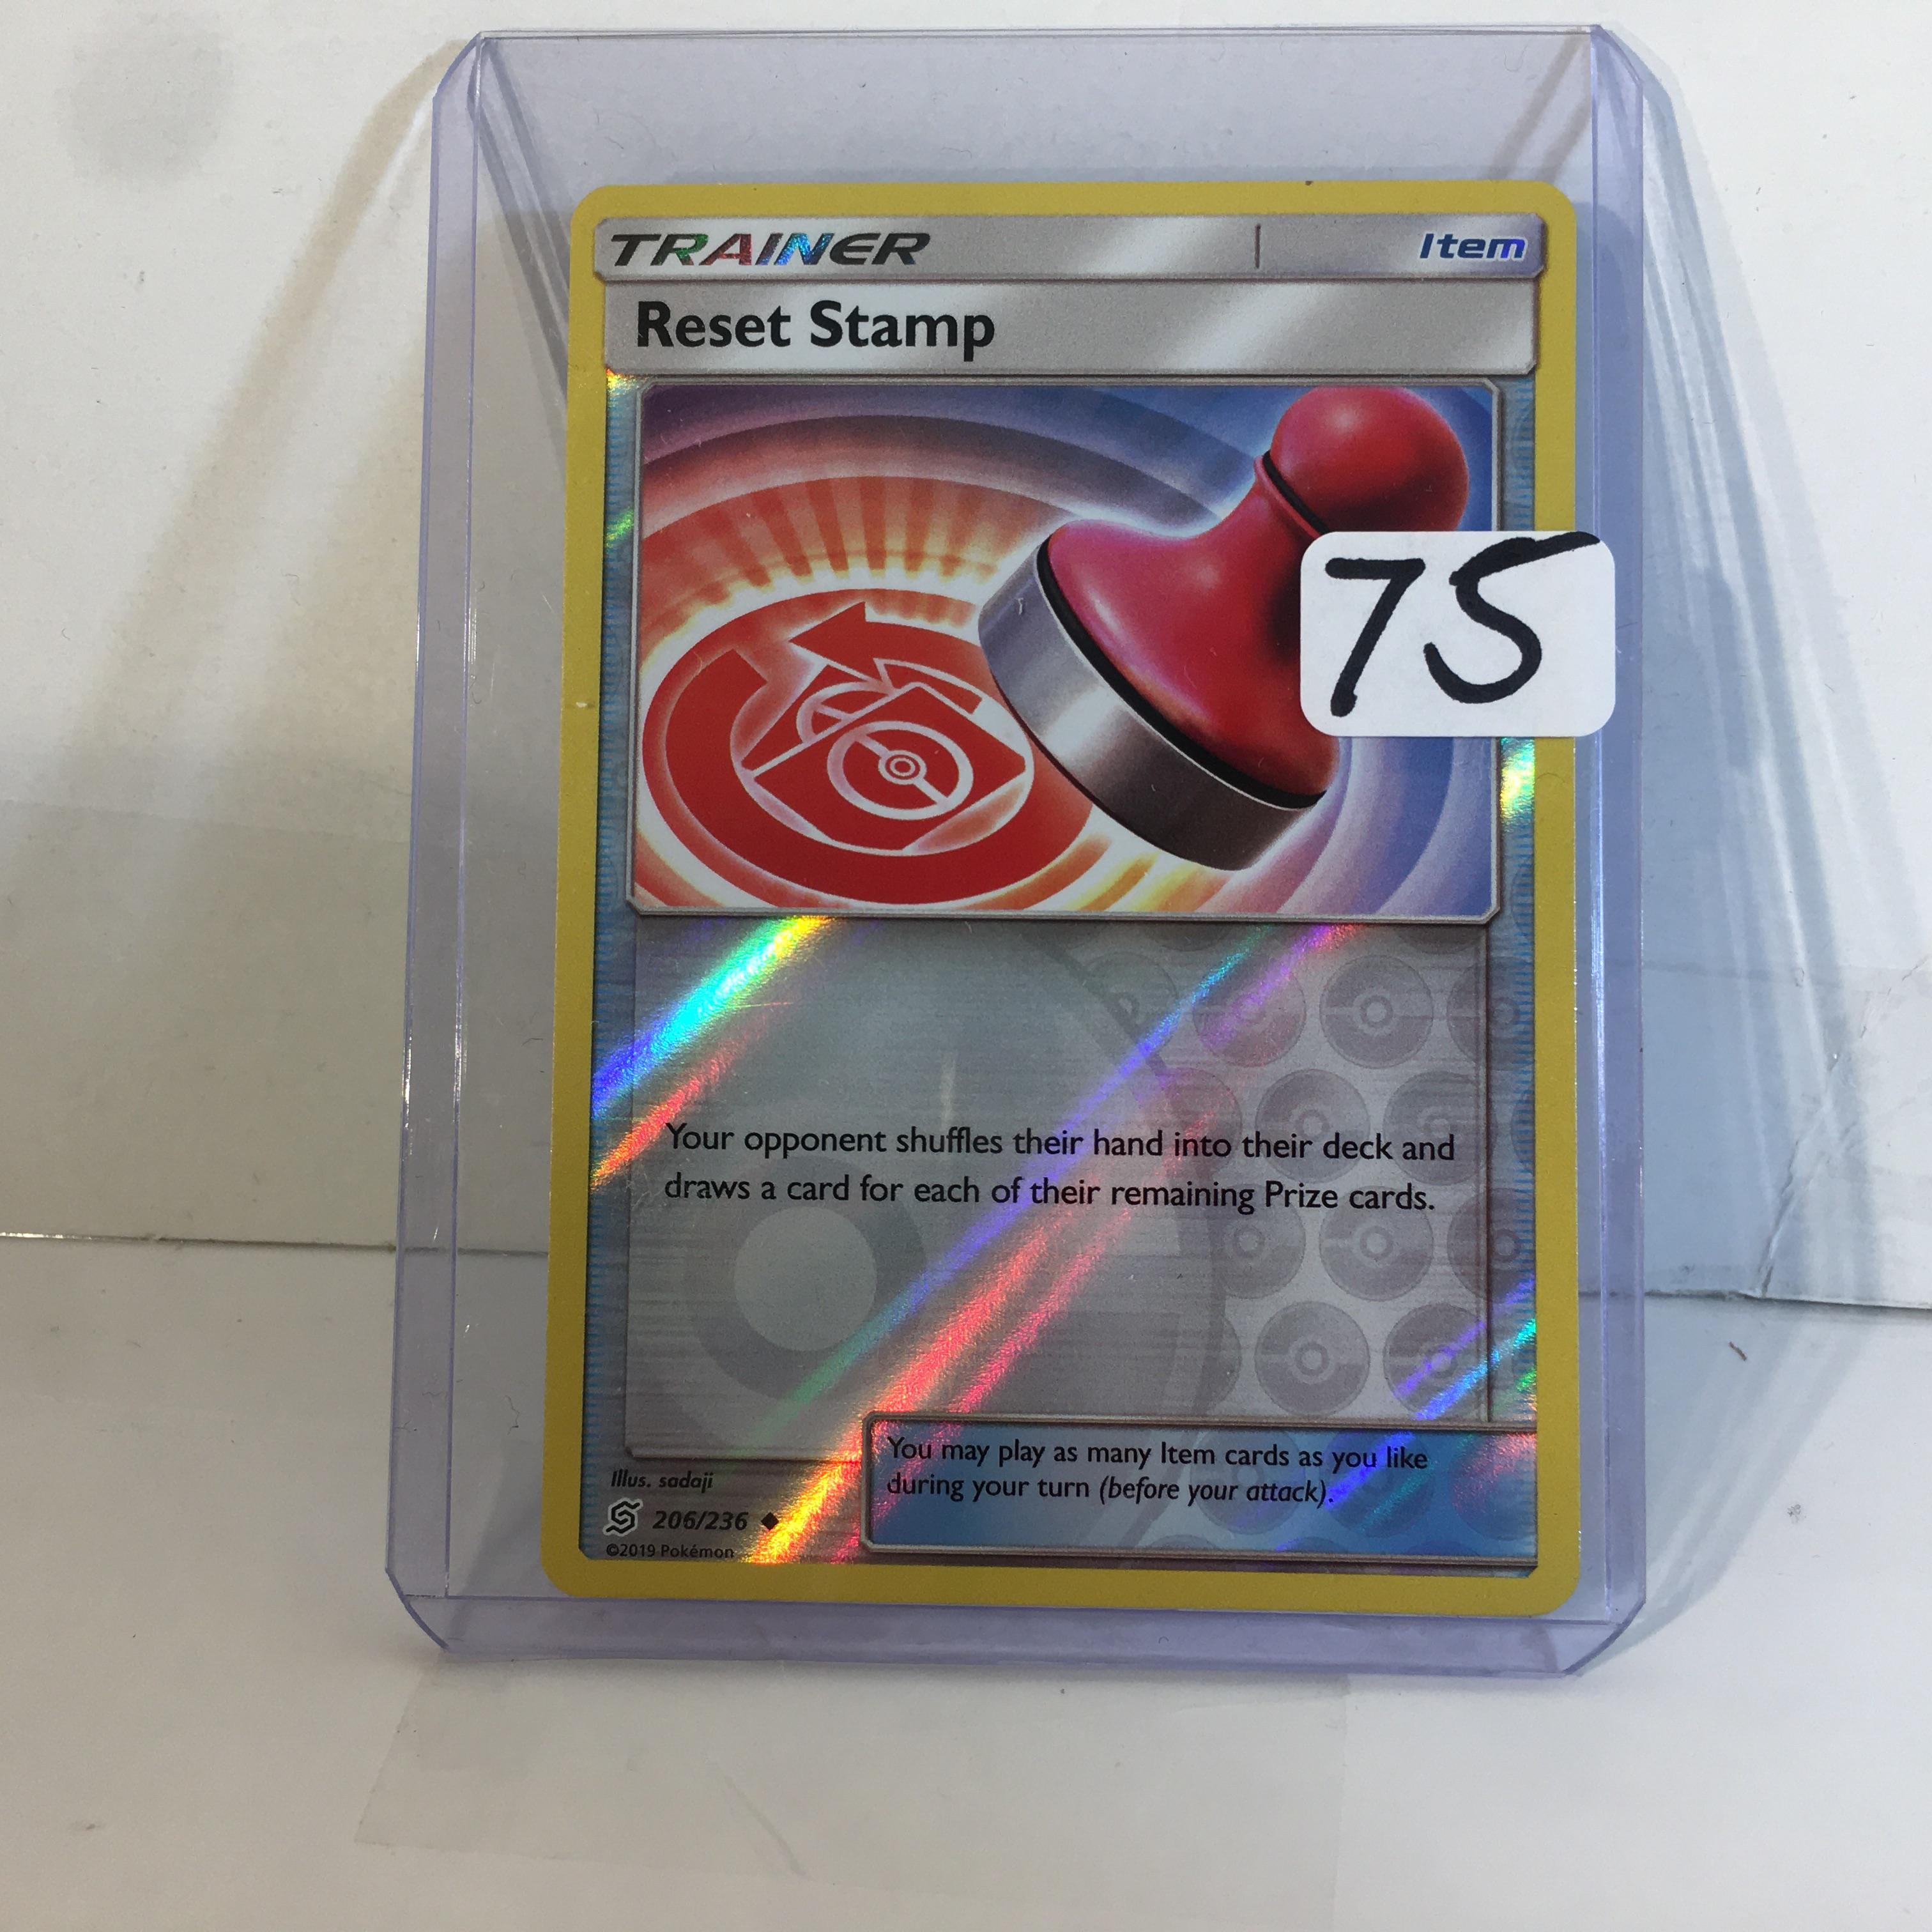 Collector Modern 2019 Pokemon TCG Trainer Reset Stamp Pokemon Trading Game Card 206/236